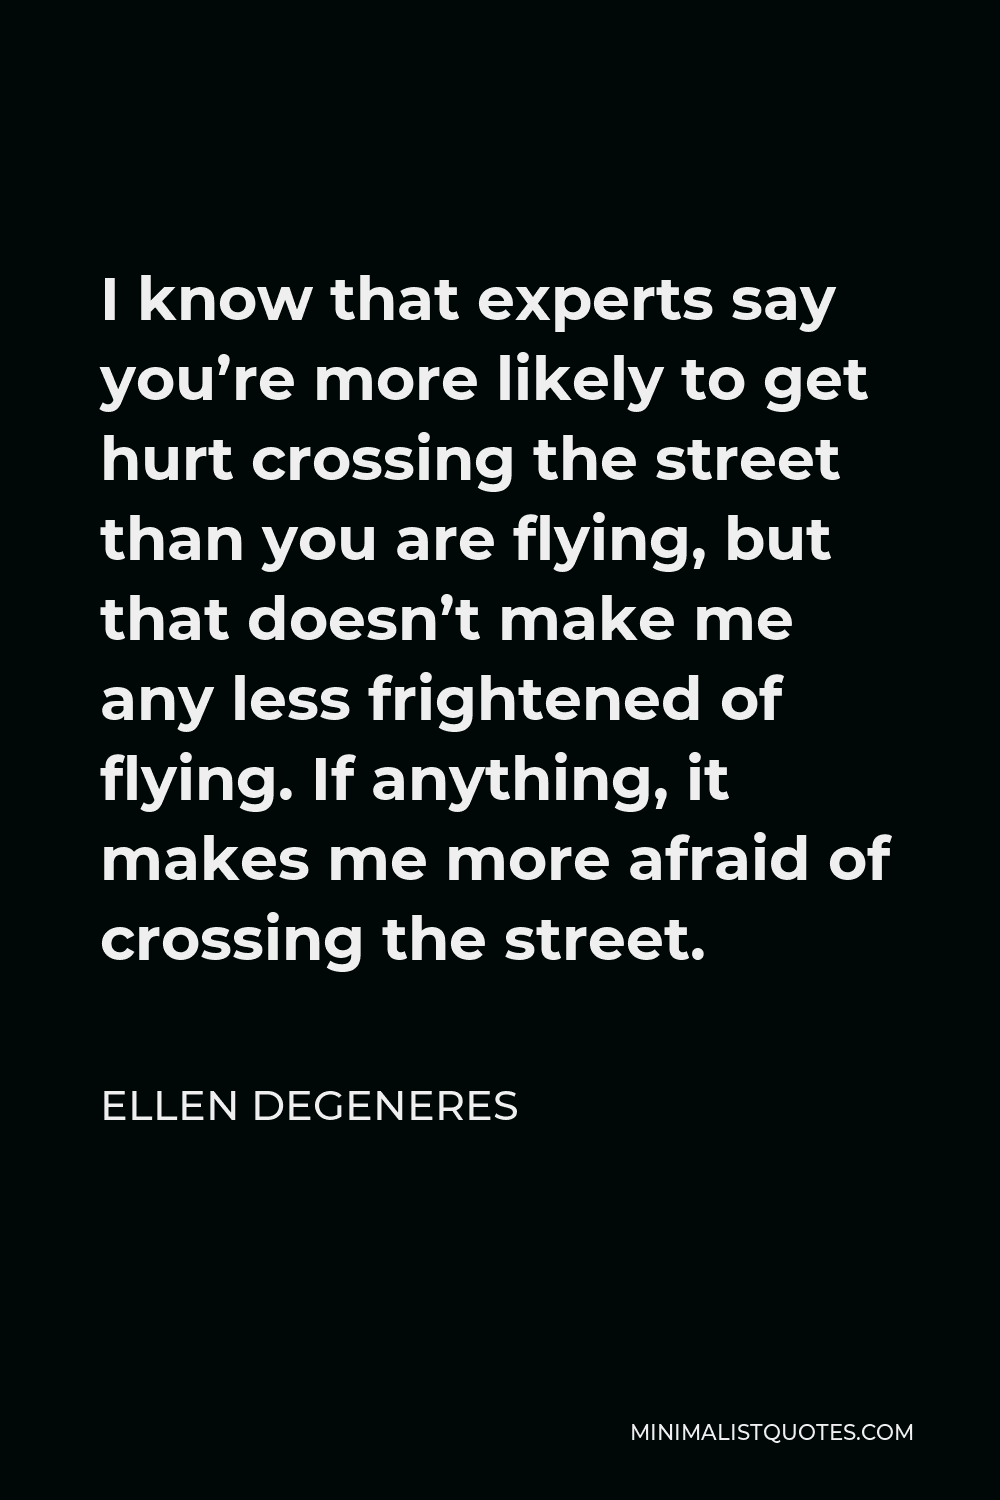 Ellen DeGeneres Quote - I know that experts say you’re more likely to get hurt crossing the street than you are flying, but that doesn’t make me any less frightened of flying. If anything, it makes me more afraid of crossing the street.